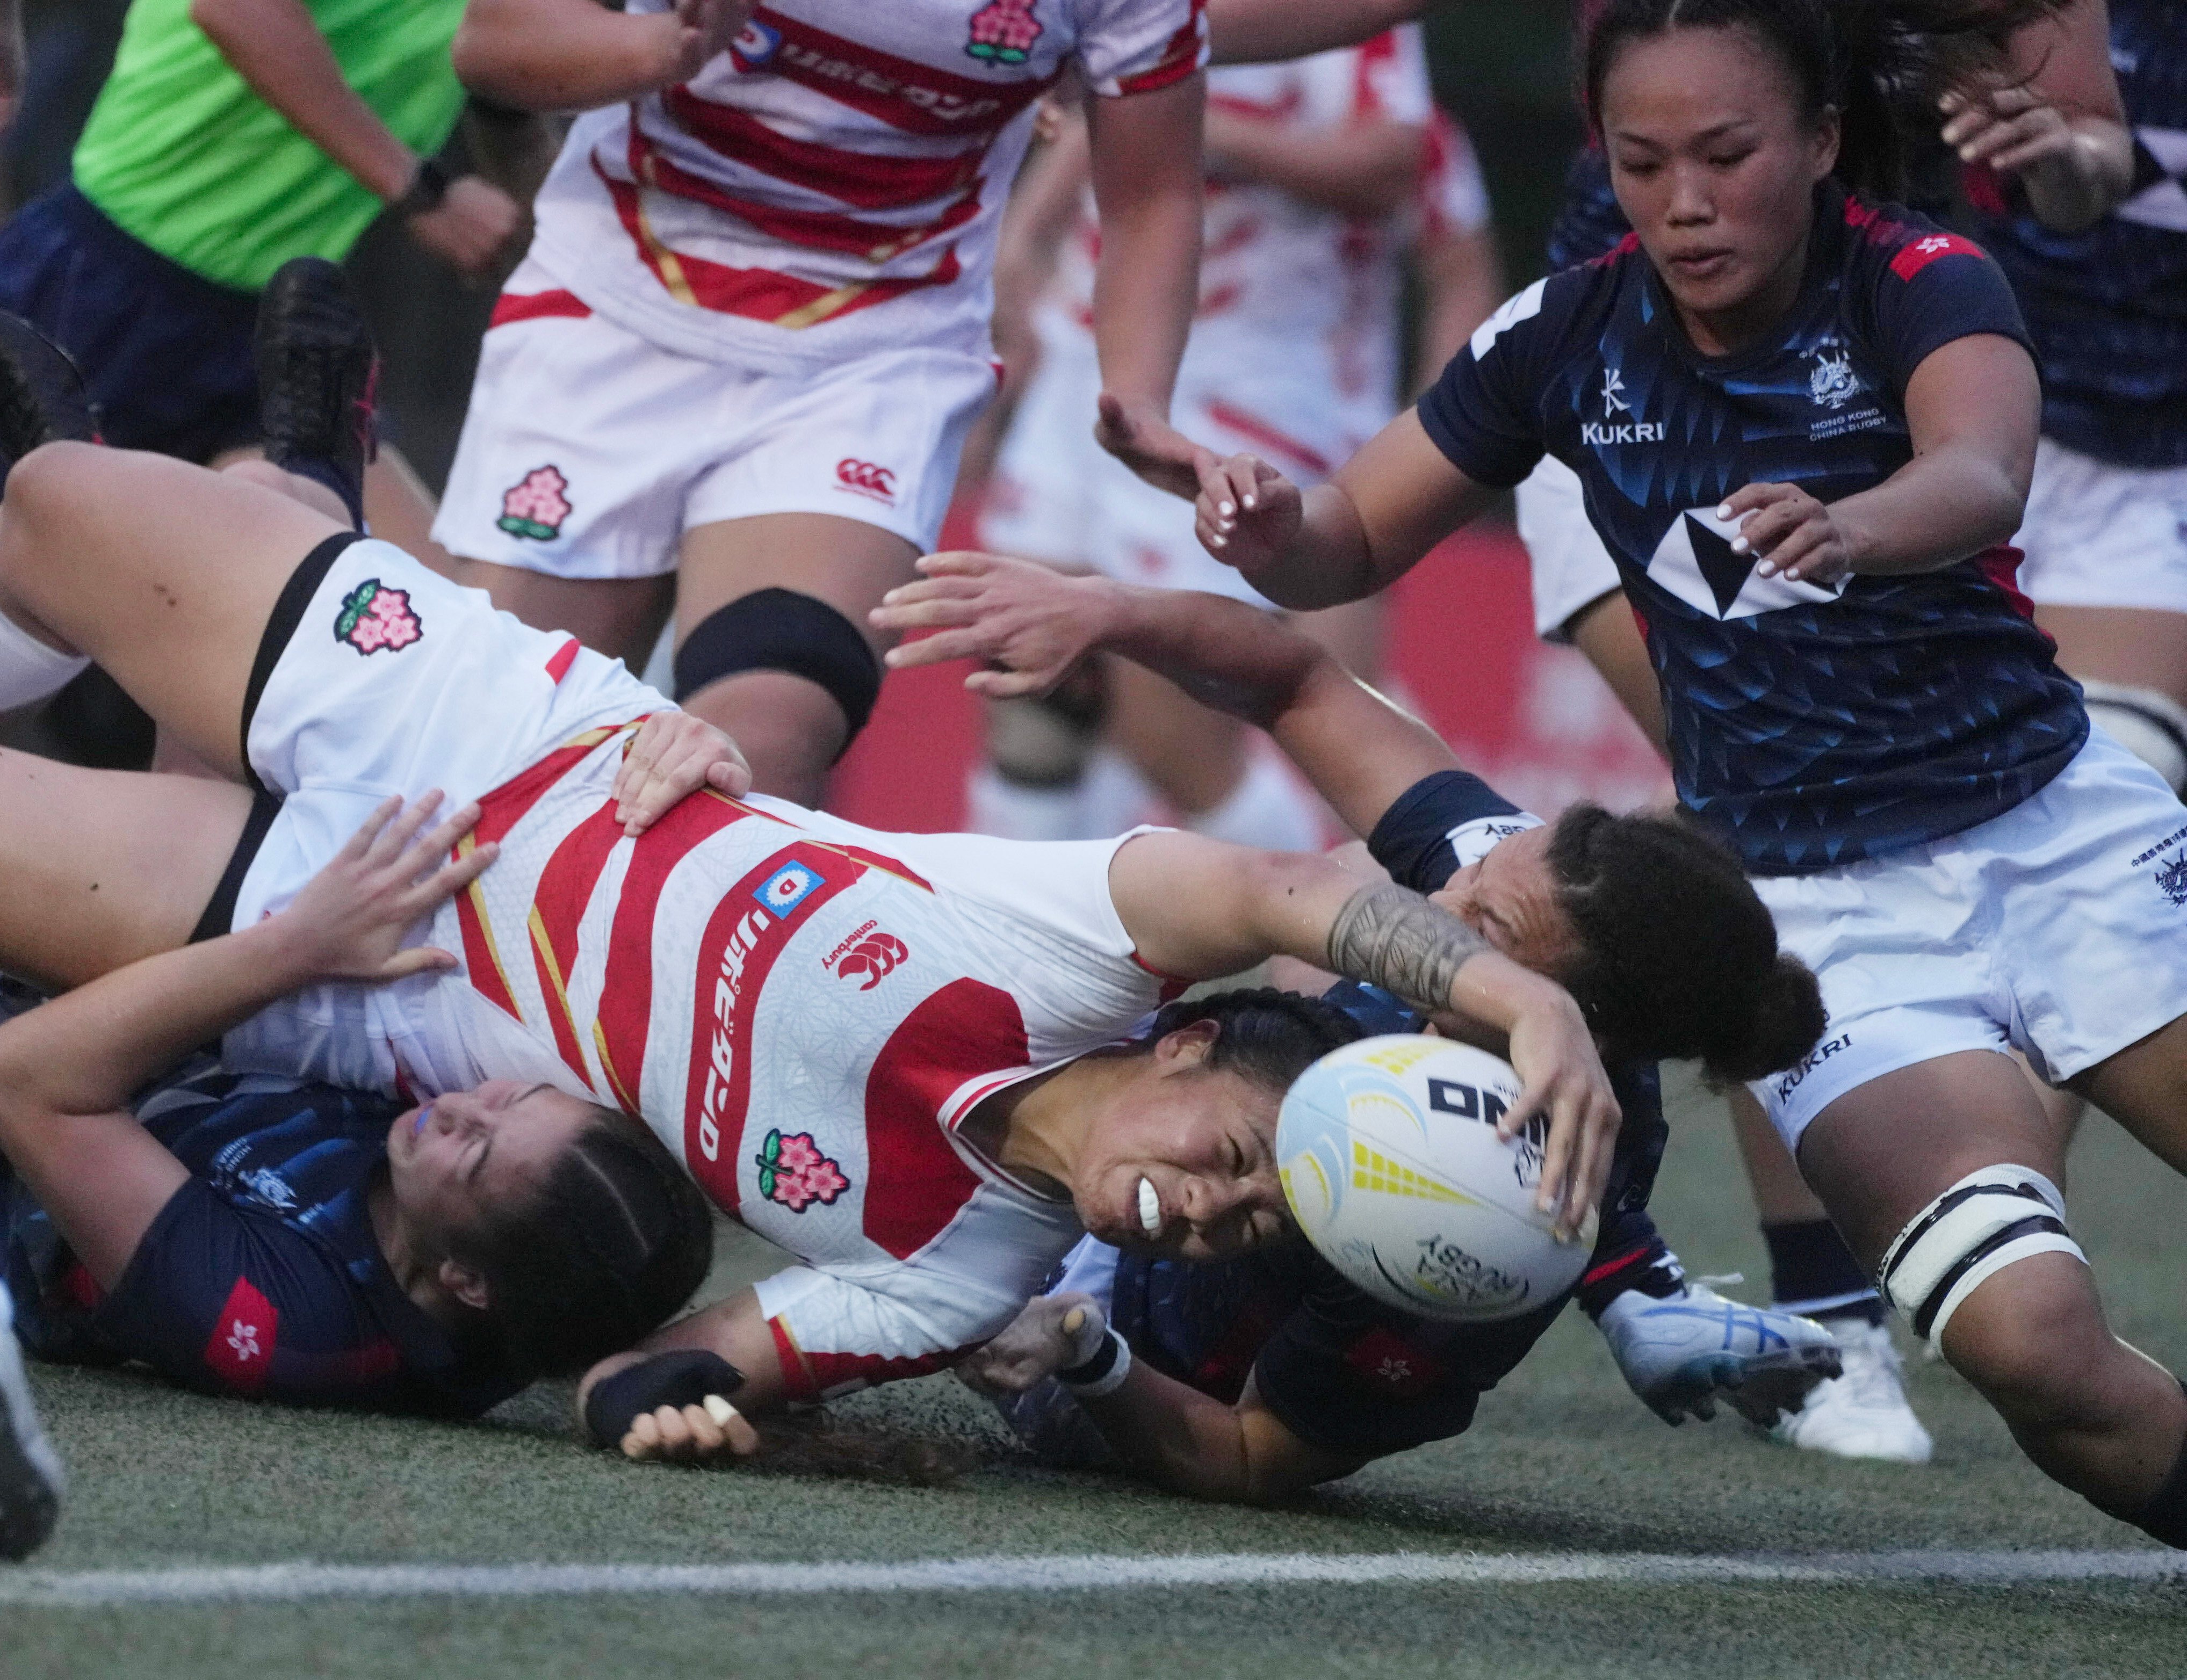 Rugby Sevens - A Thrilling Spectacle of 2025